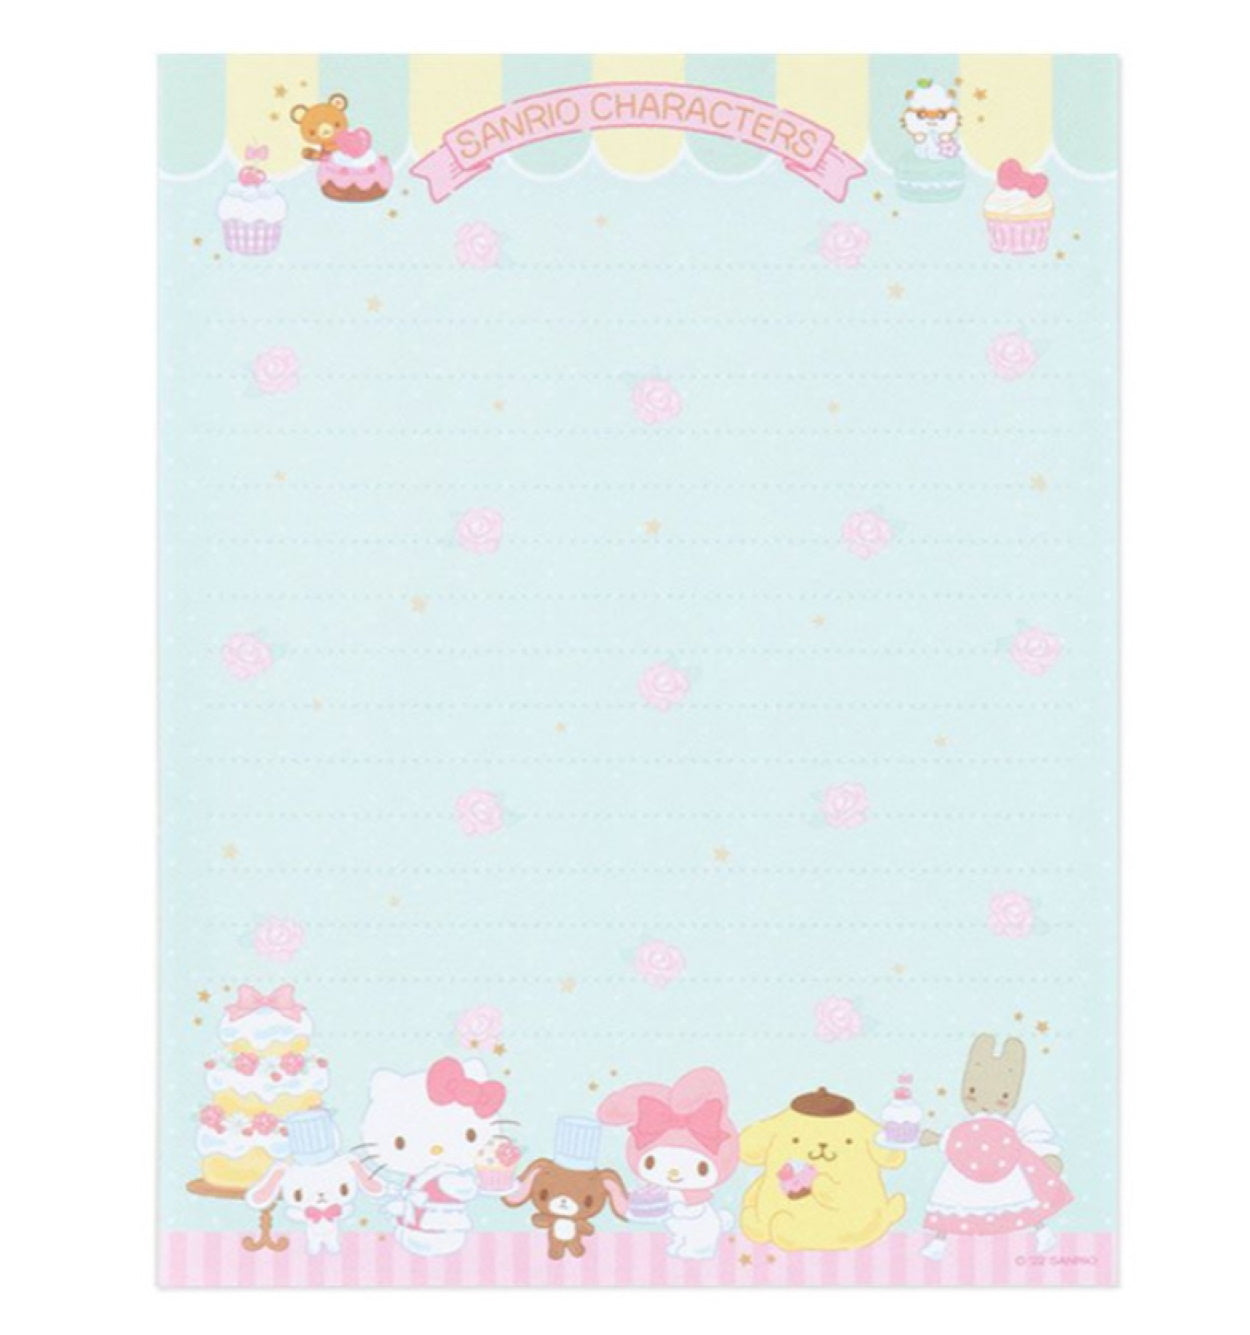 Sanrio Mix Character Letter Set